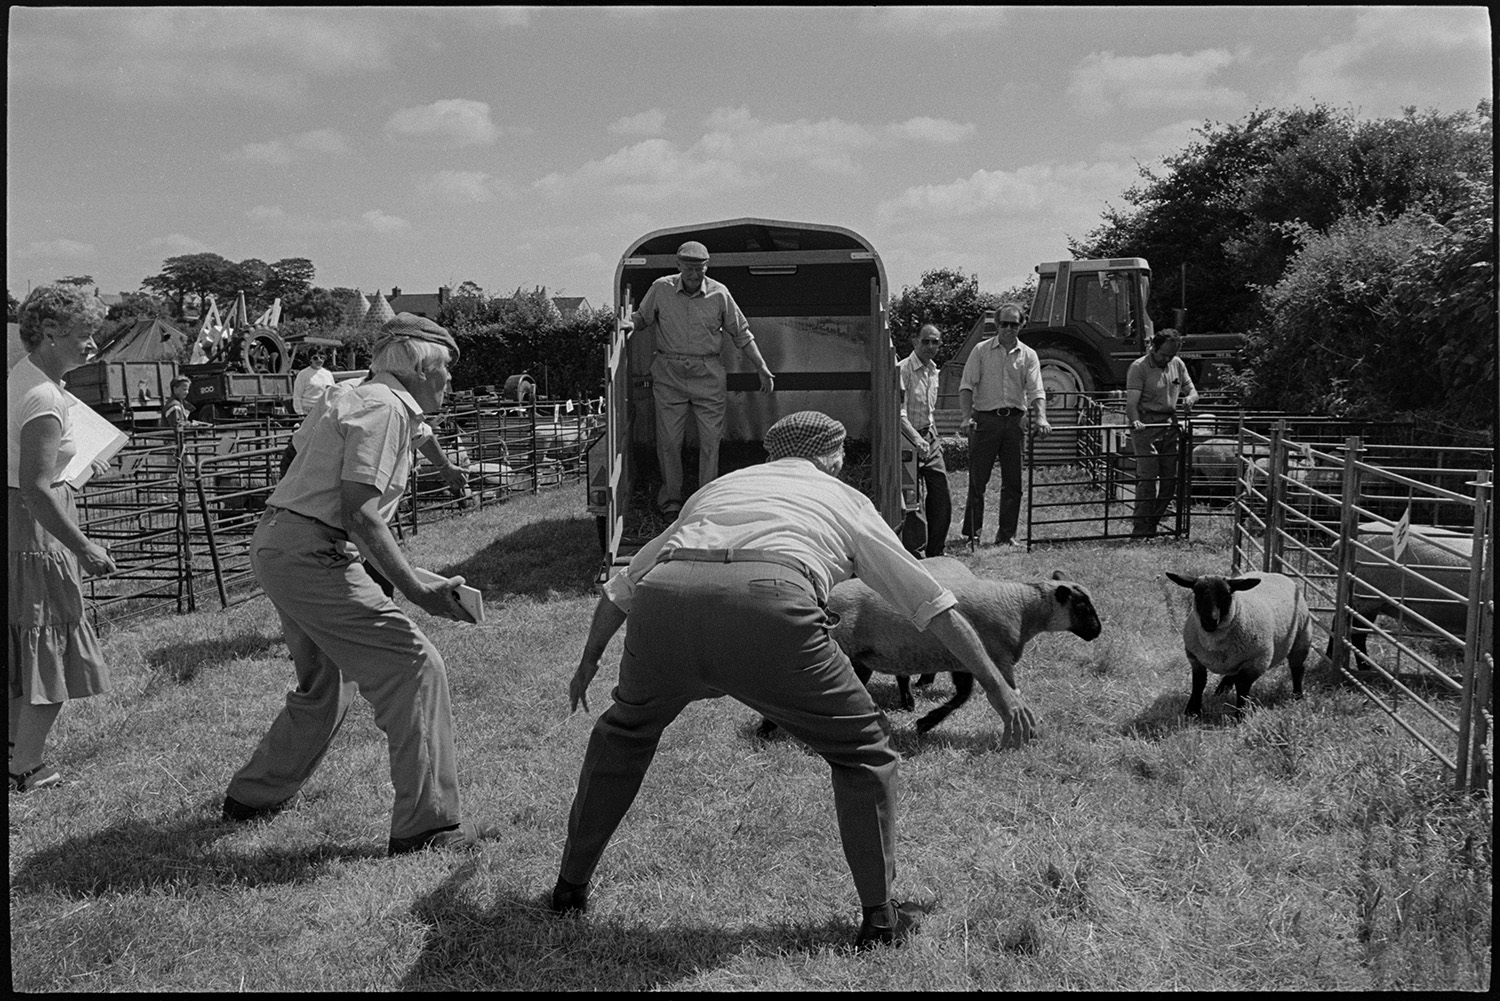 Country fair, vintage cars, sheep being rounded up for show.
[Sheep being unloaded from a trailer and guided into a pen at Ashreigney Country Fair. A woman is holding a clipboard and pen nearby. There are other agricultural vehicles and sheep pens in the field.]